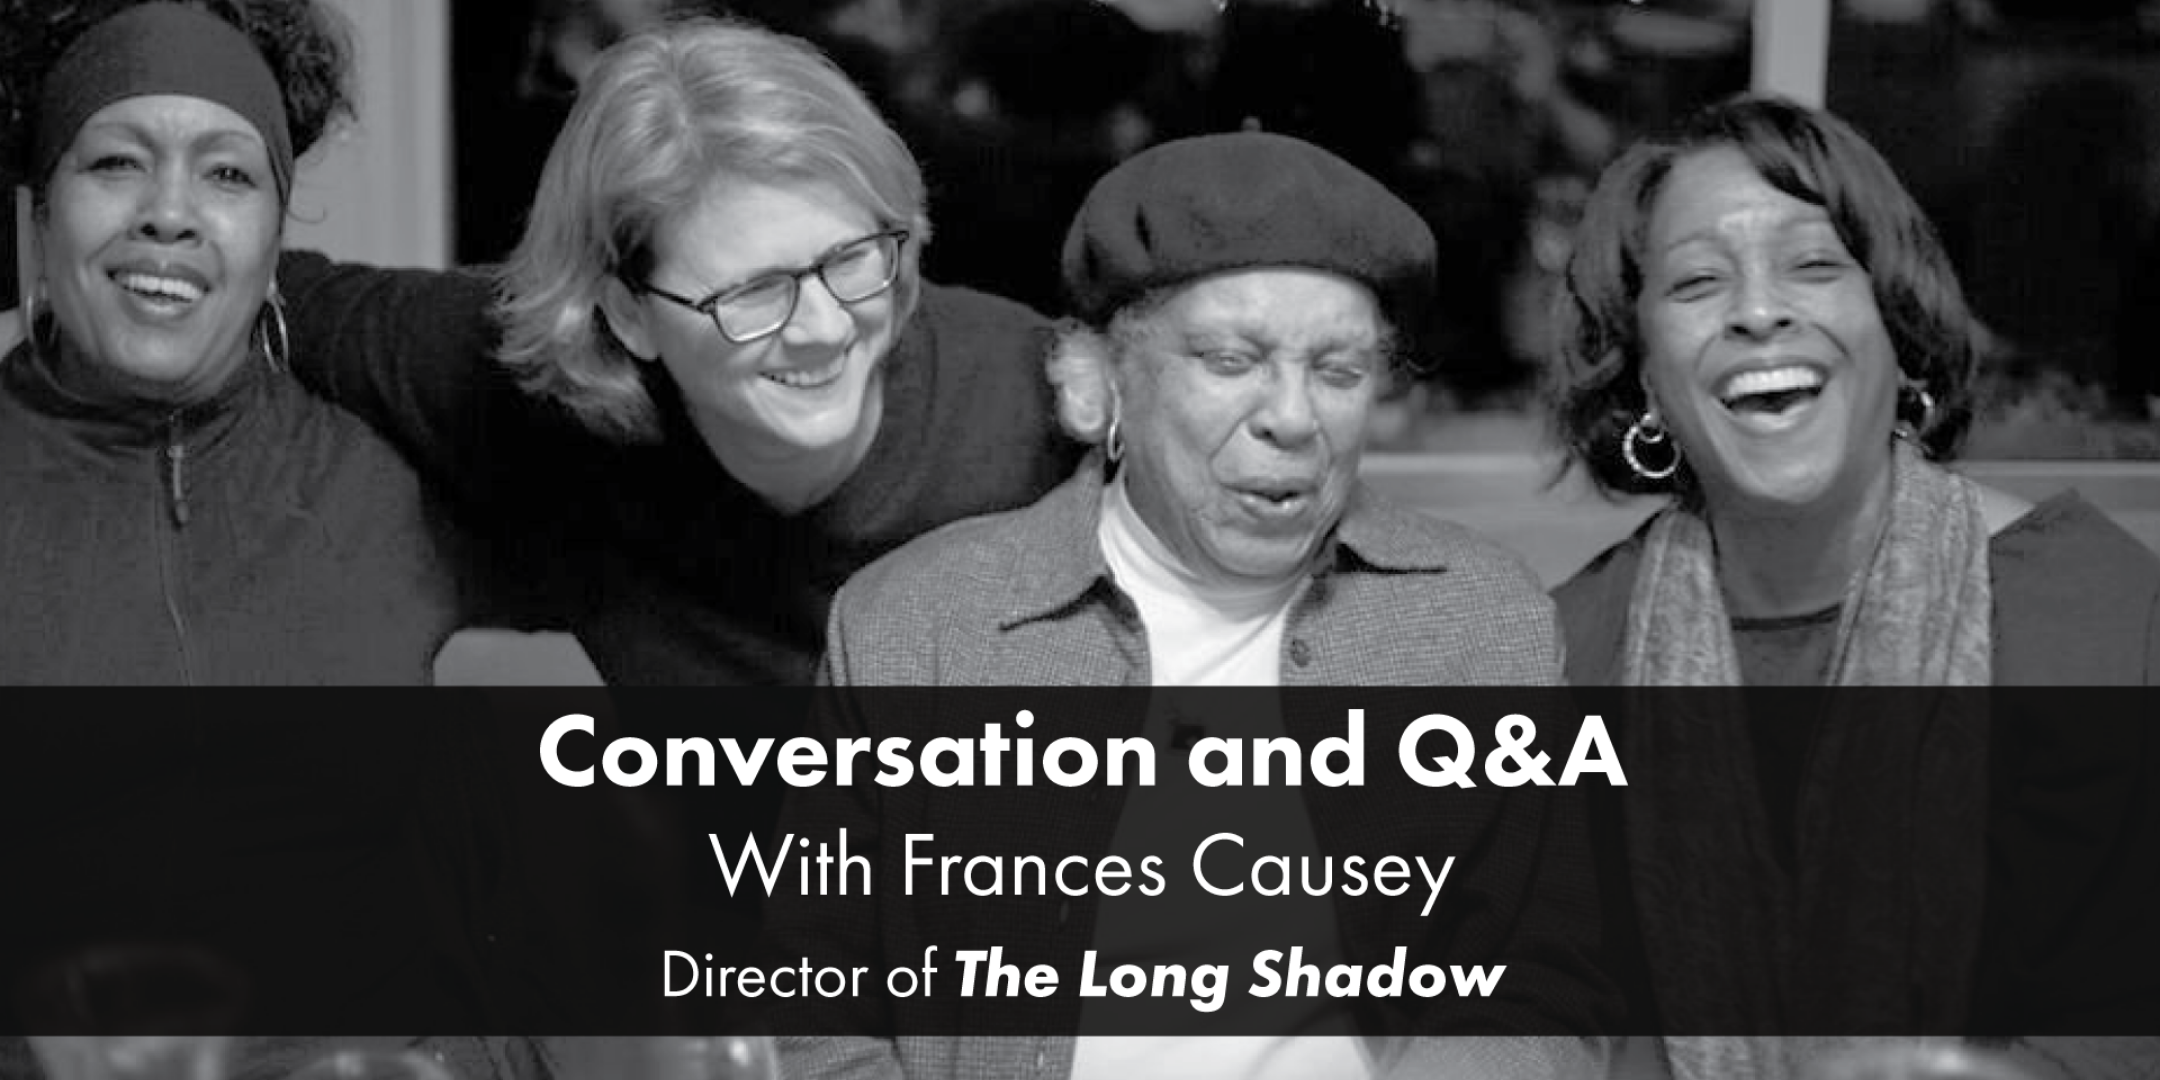 Conversation and Q&A with Francis Causey Director of "The Long Shadow"